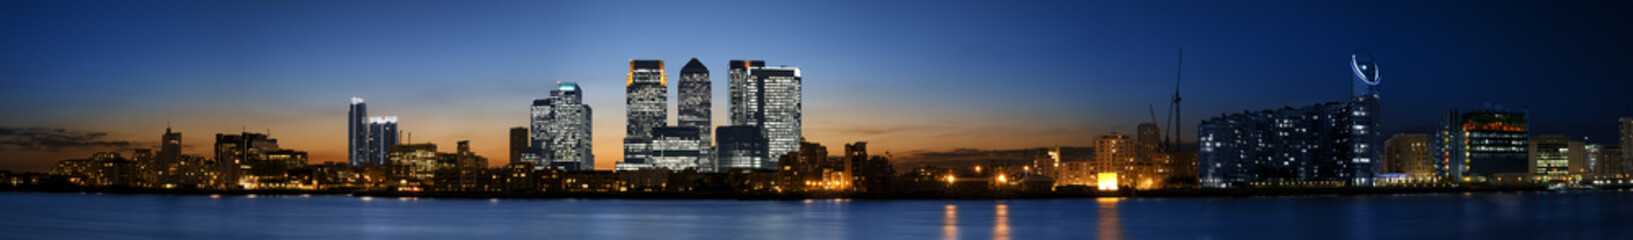 Panorama of the Canary Wharf area at sunset, London.